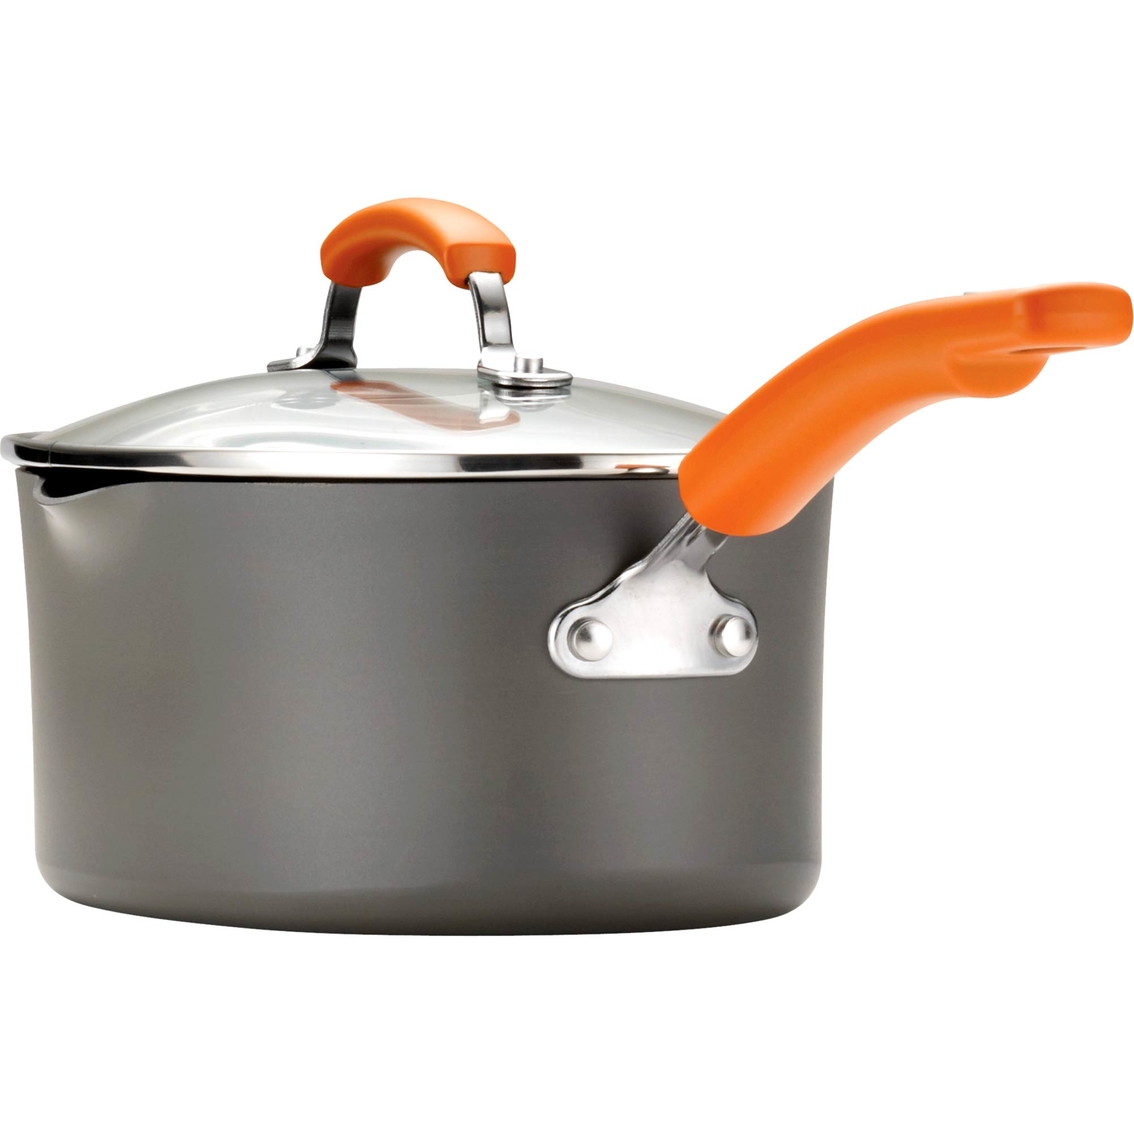 Rachael Ray Hard Anodized Nonstick 3 Quart Covered Oval Saucepan - Image 2 of 4